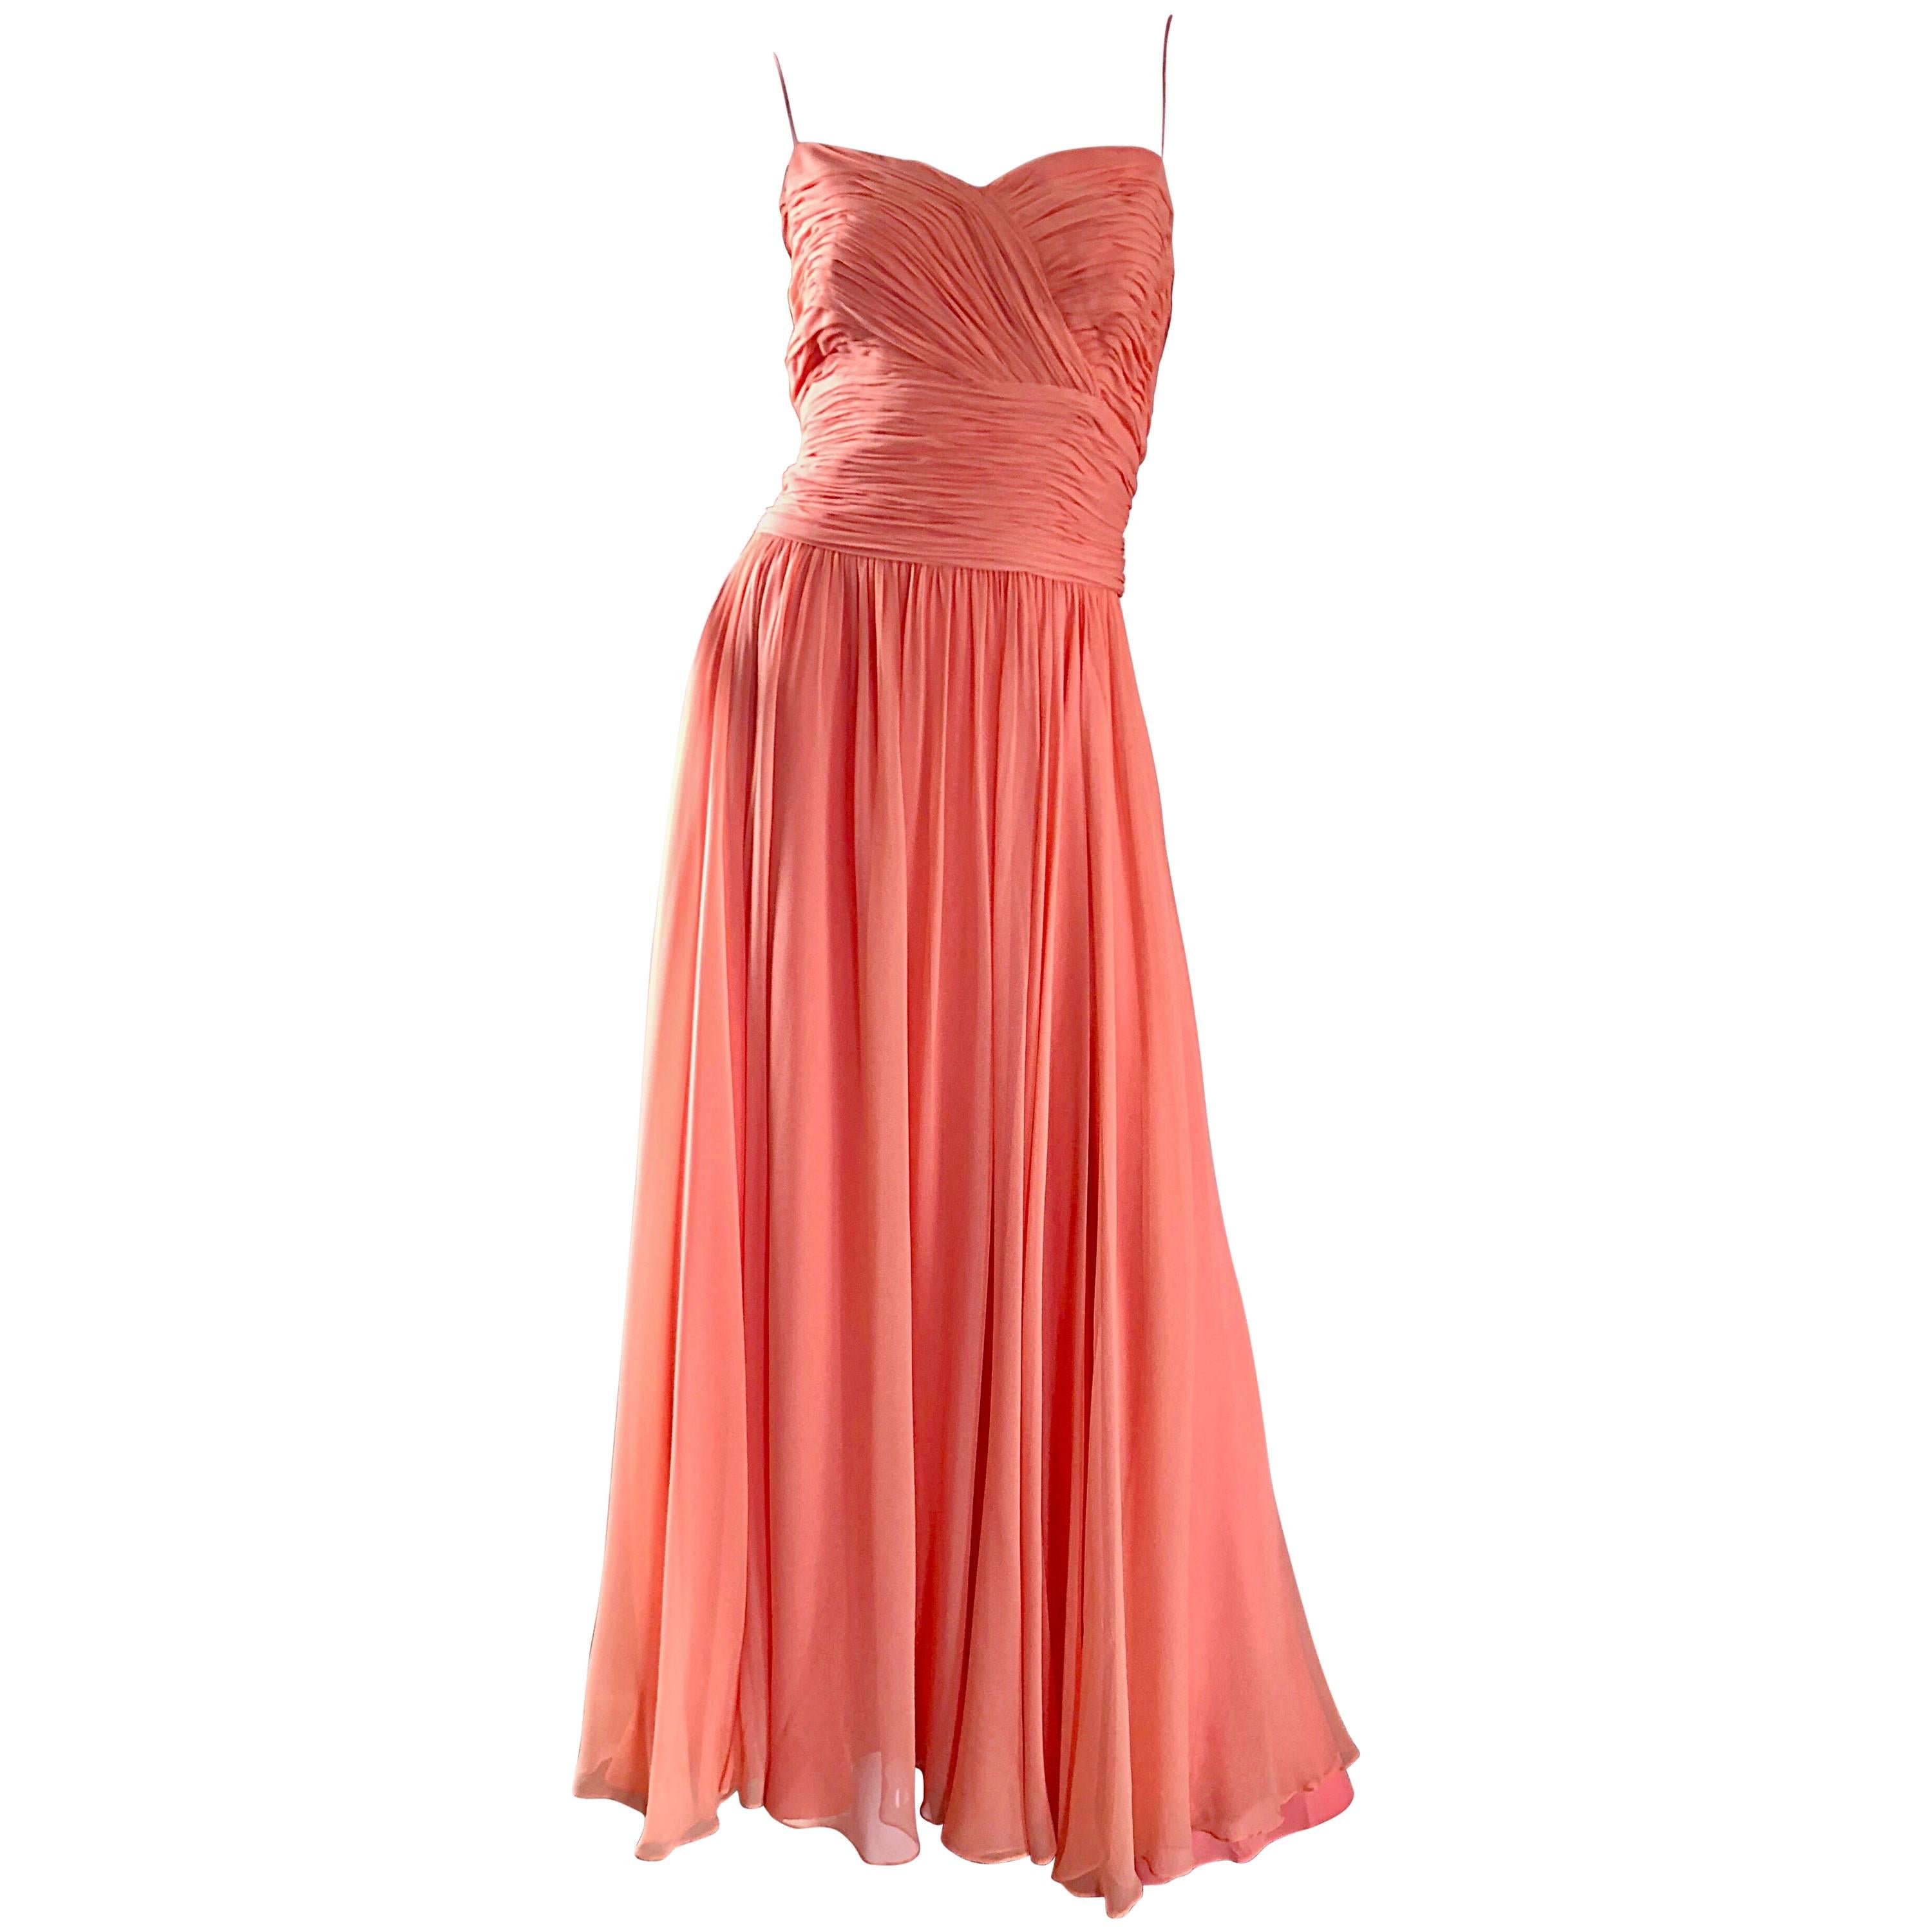 Gorgeous 1950s Saks 5th Ave. Salmon / Coral Pink Silk Chiffon Vintage 50s Gown